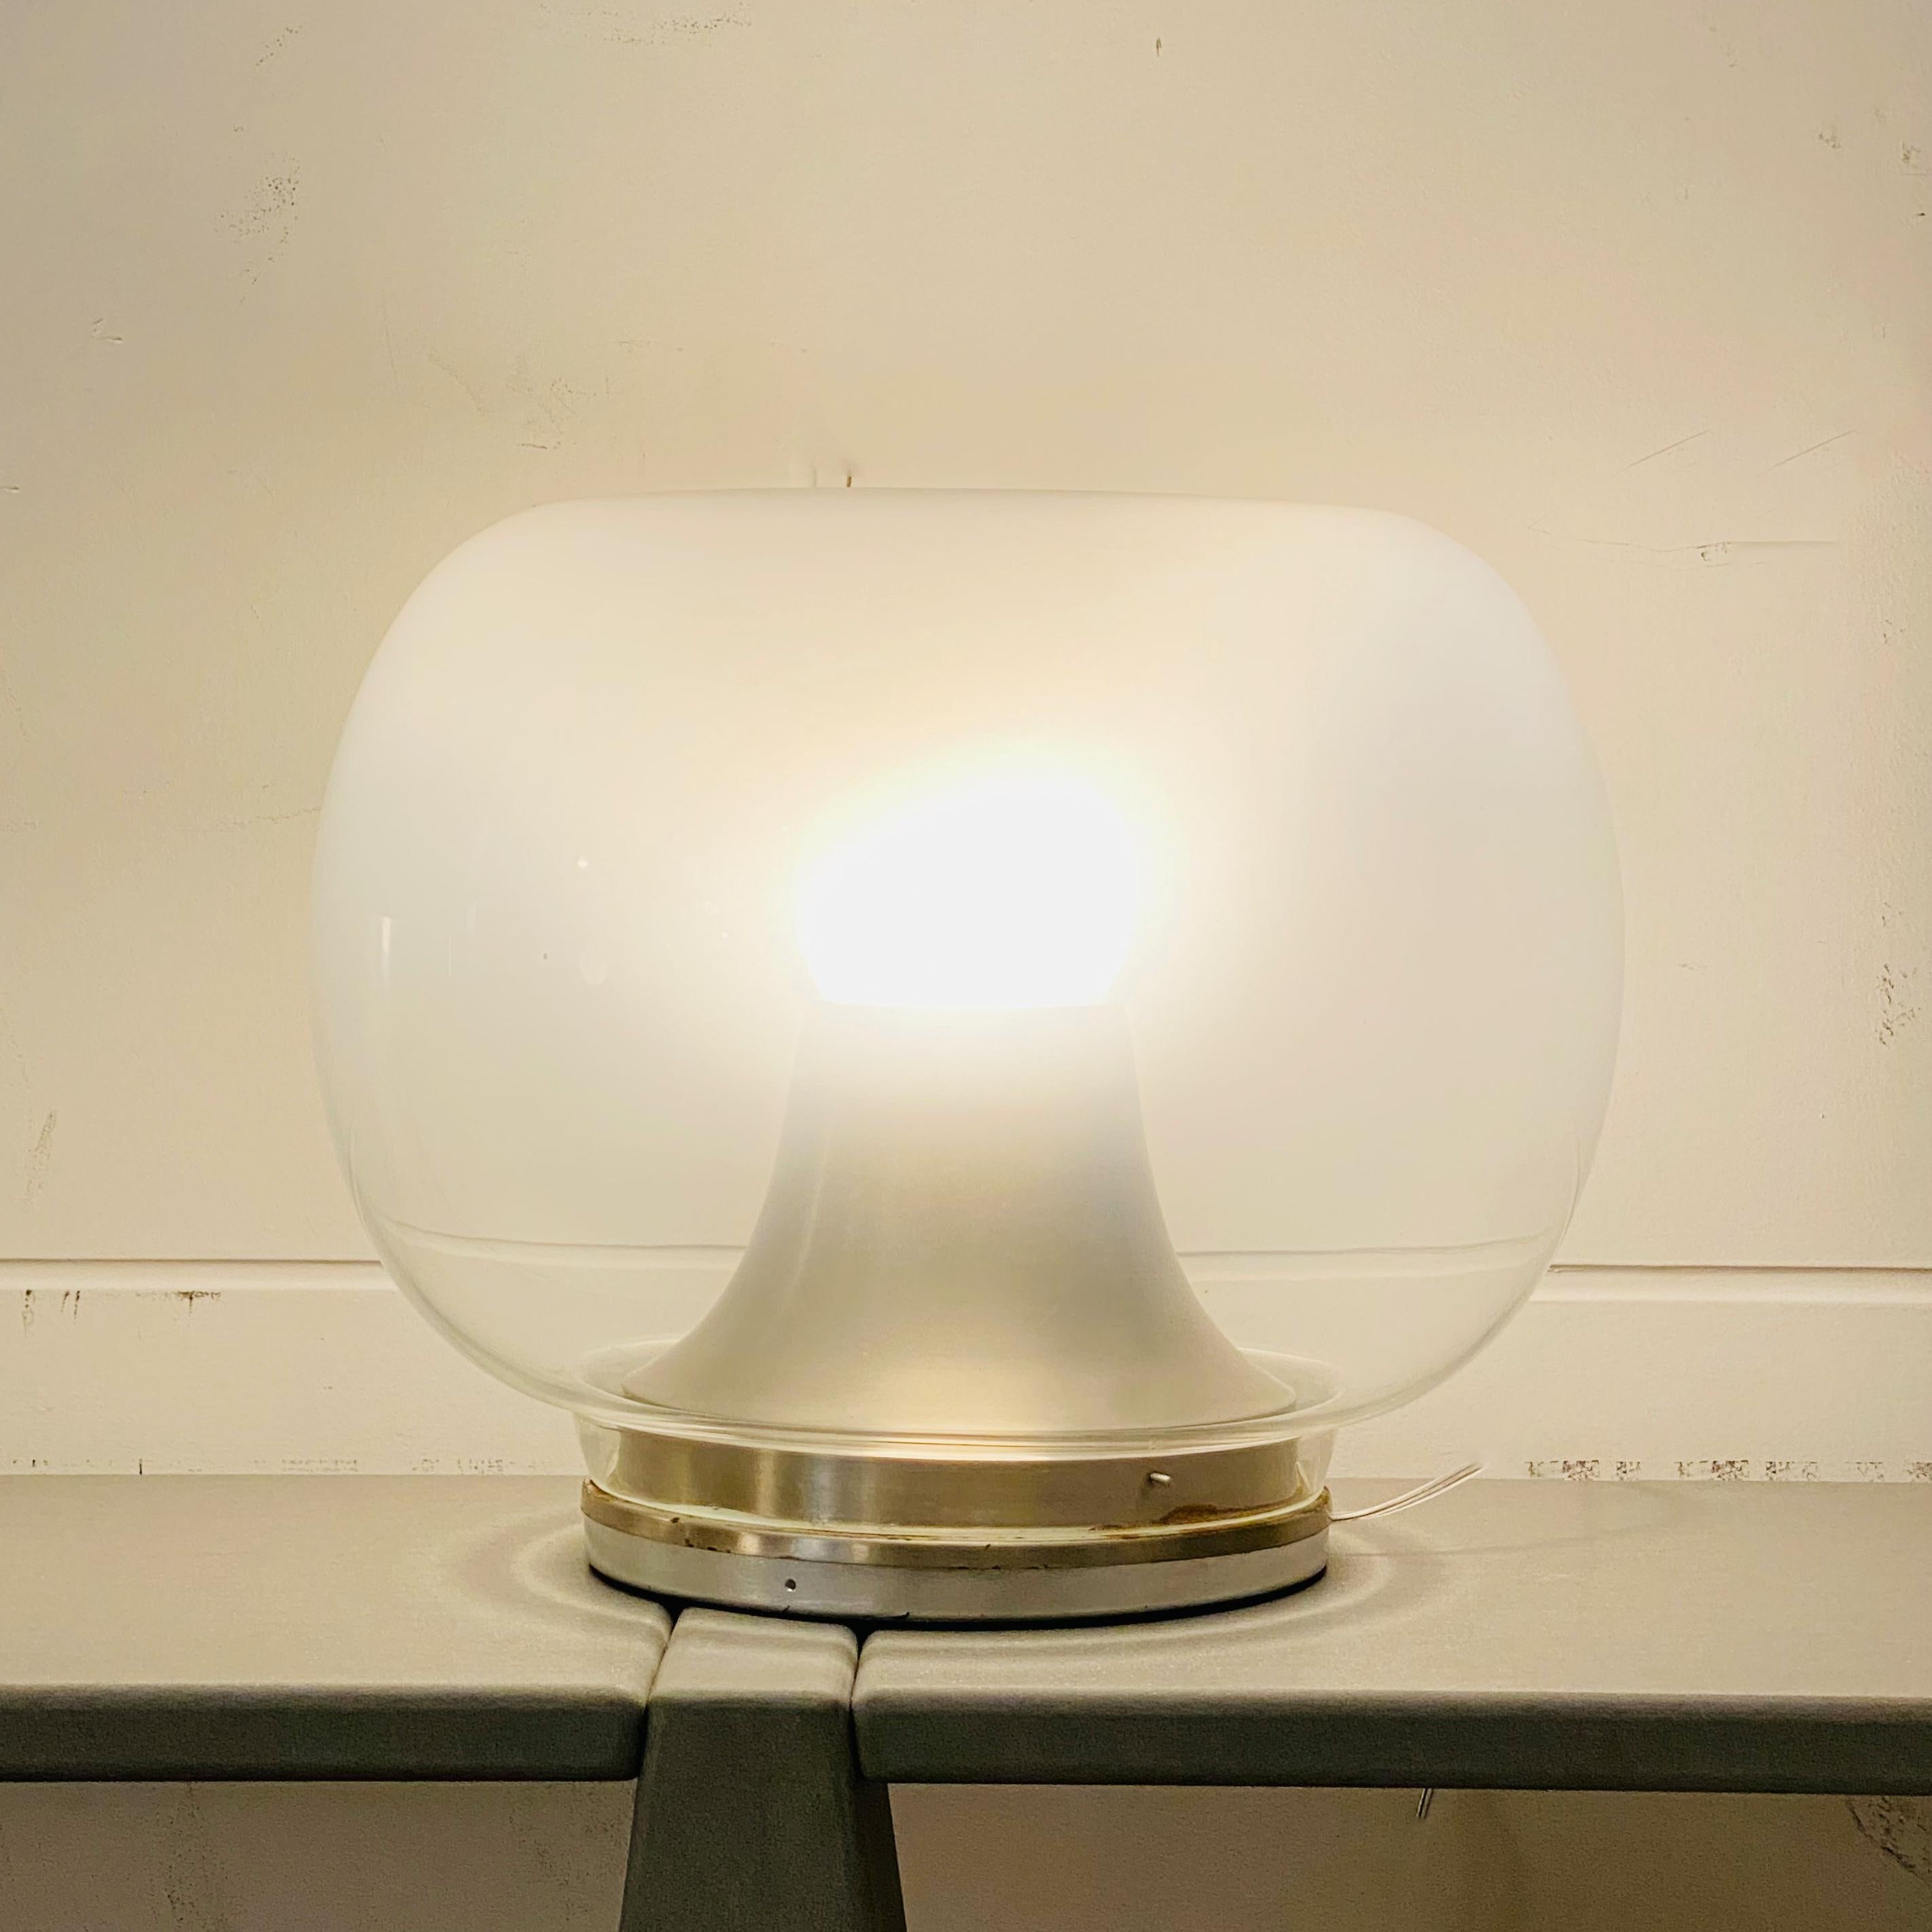 The style of this large table lamp is reminiscent of the lamps produced by Leucos in the 1970s. The diffuser of the lamp is made of opaline glass shaded in shades of white, concave at the top. The lamp has a light point and the internal lamp holder